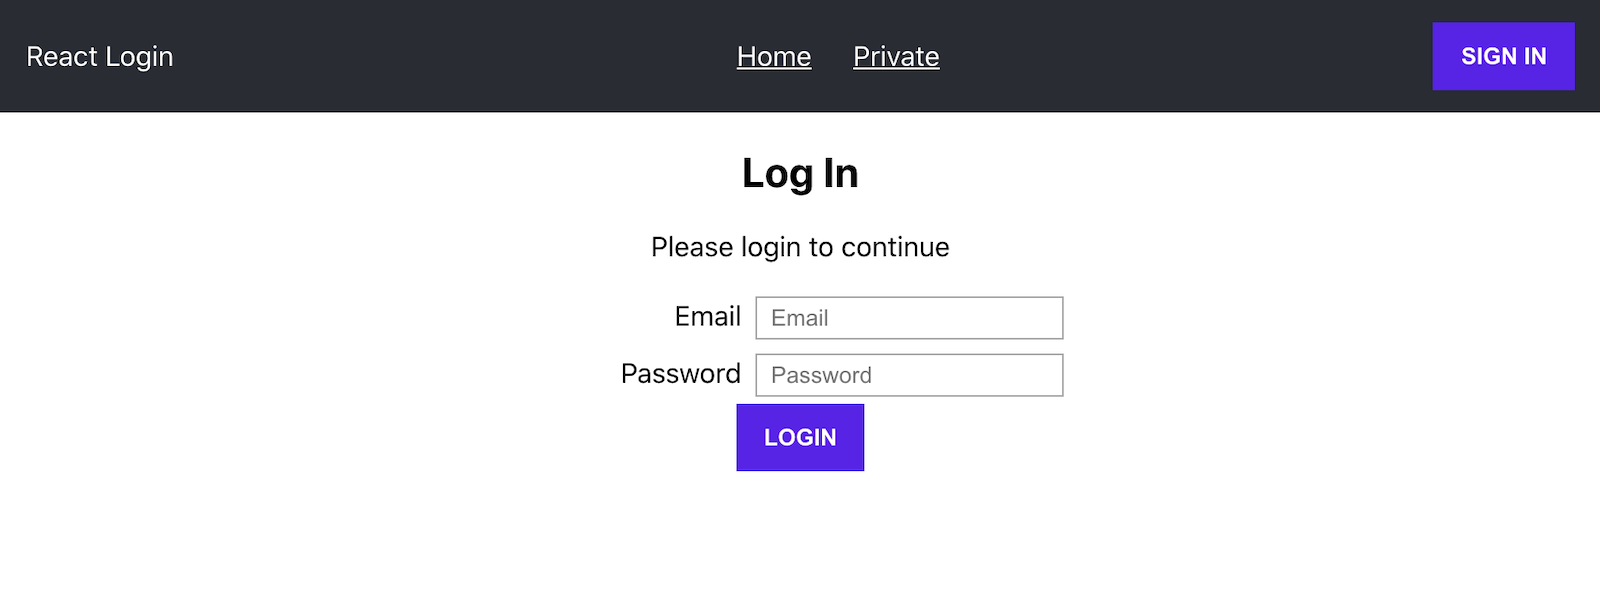 The self-hosted sign-in form